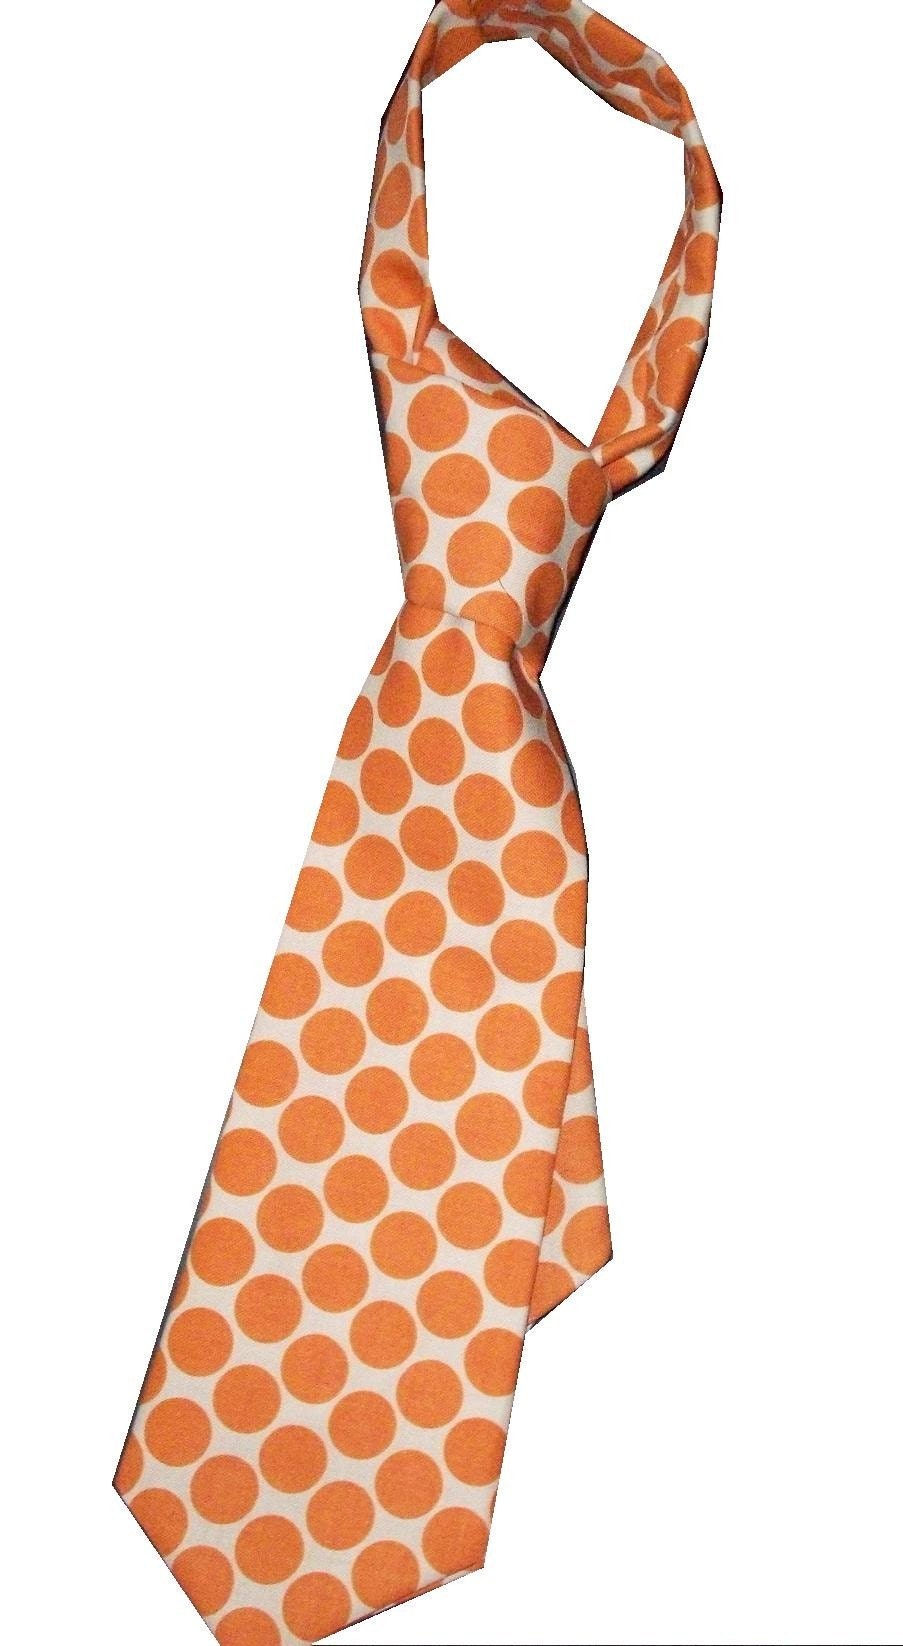 Boys Tie Amy Butler Moon Dots in Orange, YOU PICK SIZE